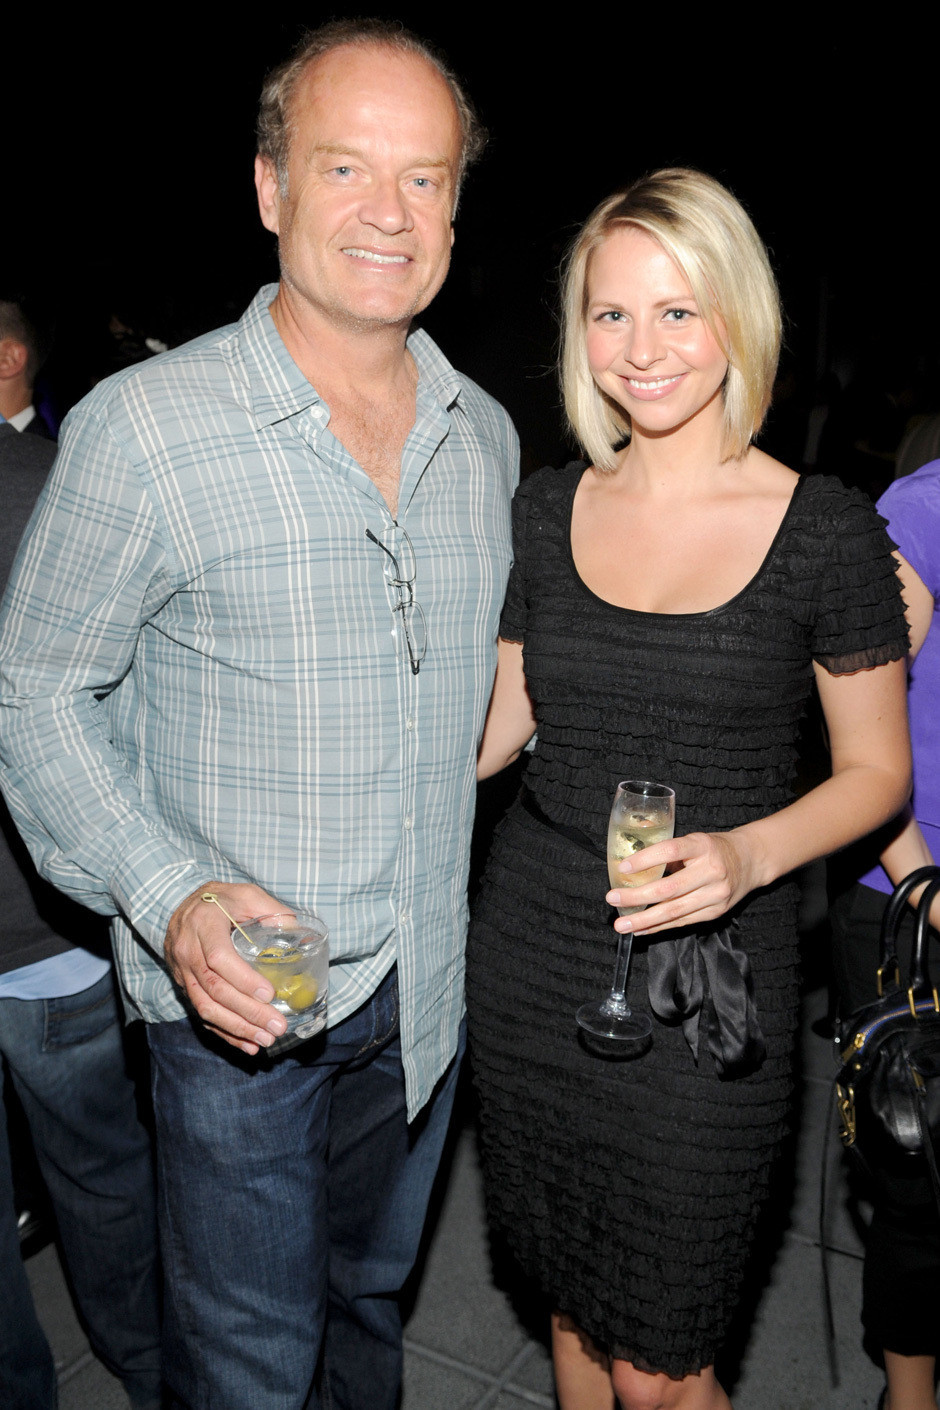 Kelsey Grammer with Kayte Walsh